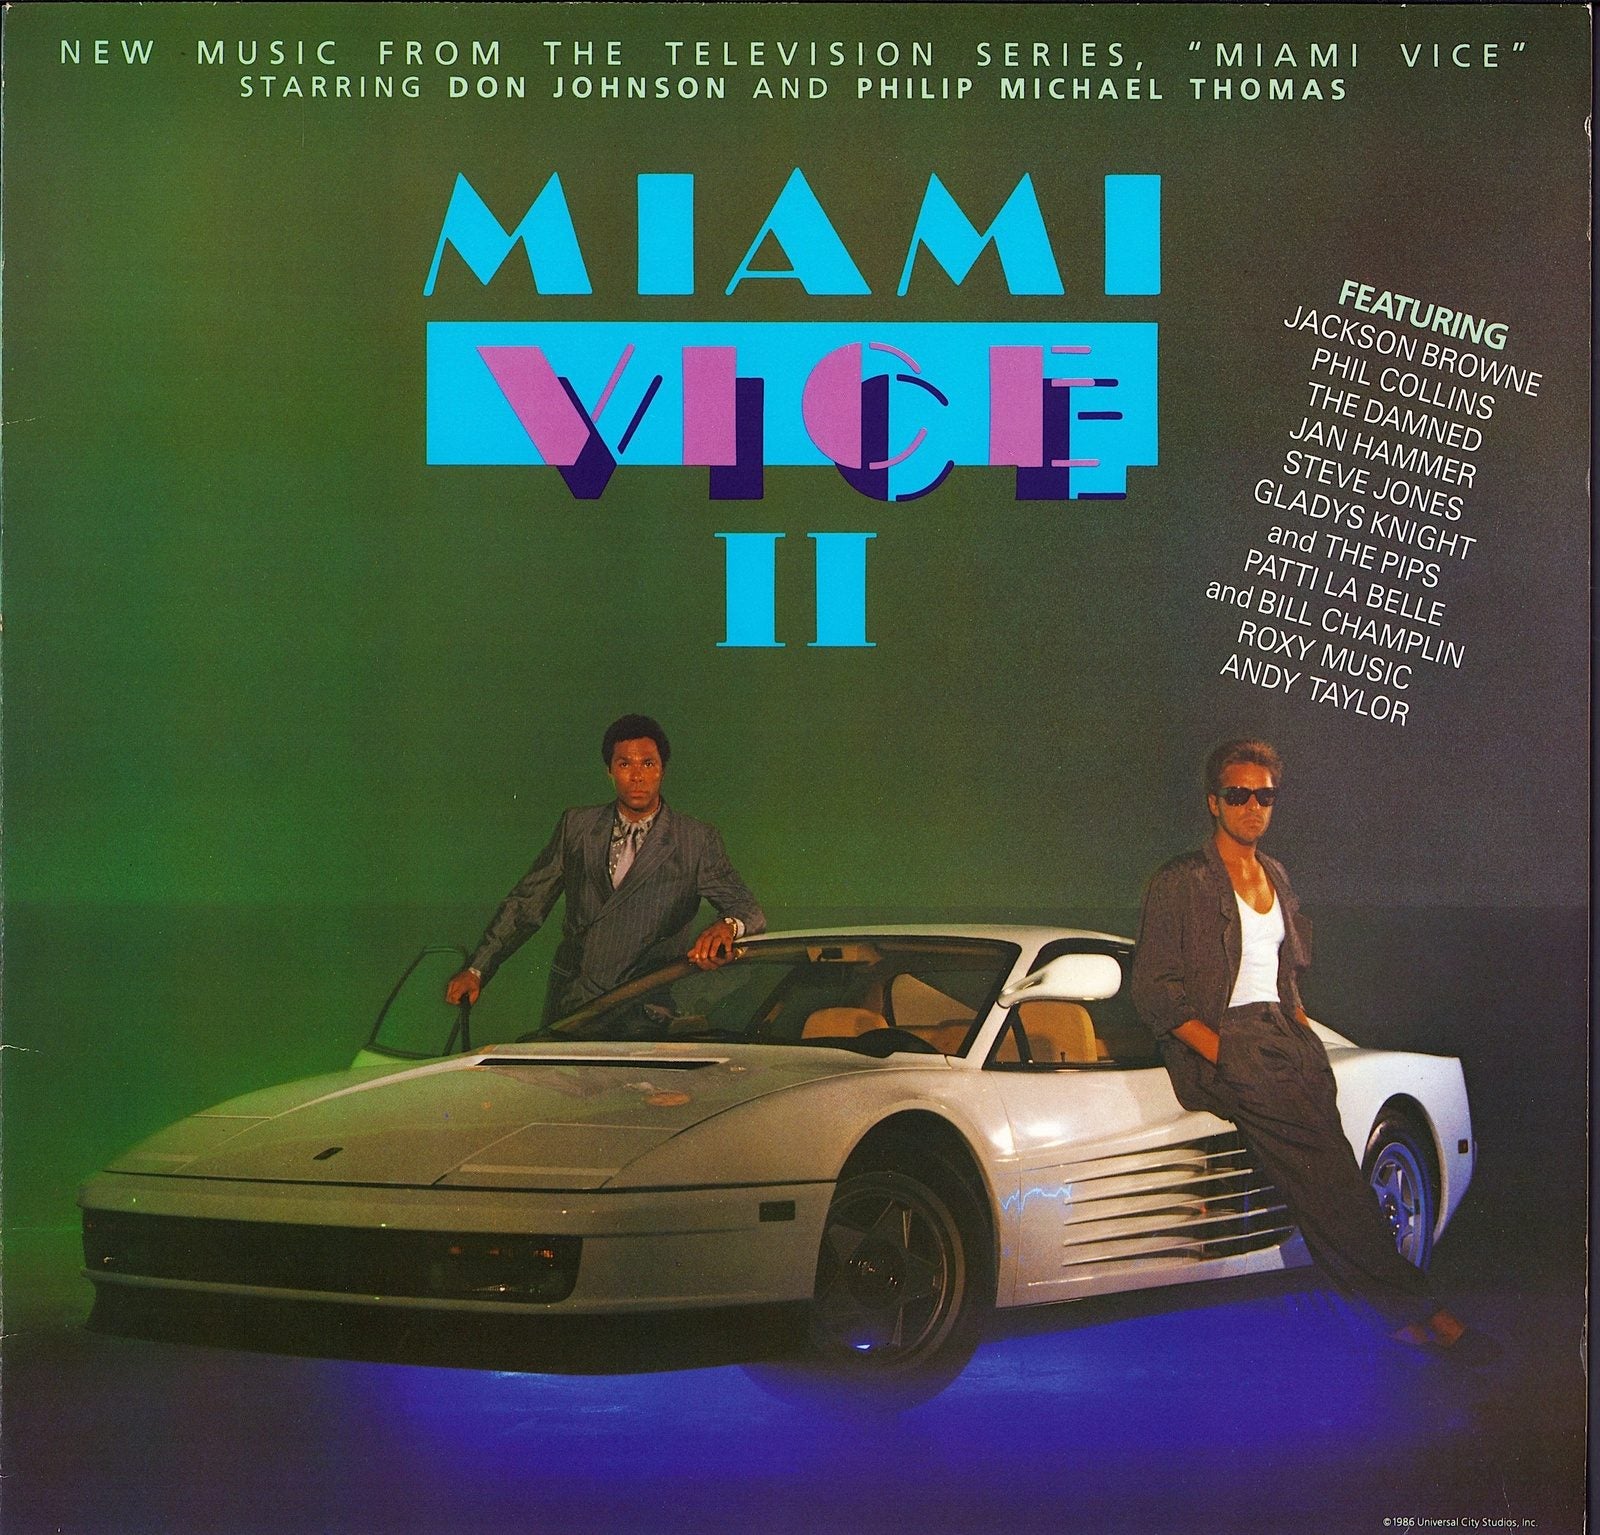 Miami Vice II New Music From The Television Series, "Miami Vice" Starring Don Johnson And Philip Michael Thomas Vinyl LP